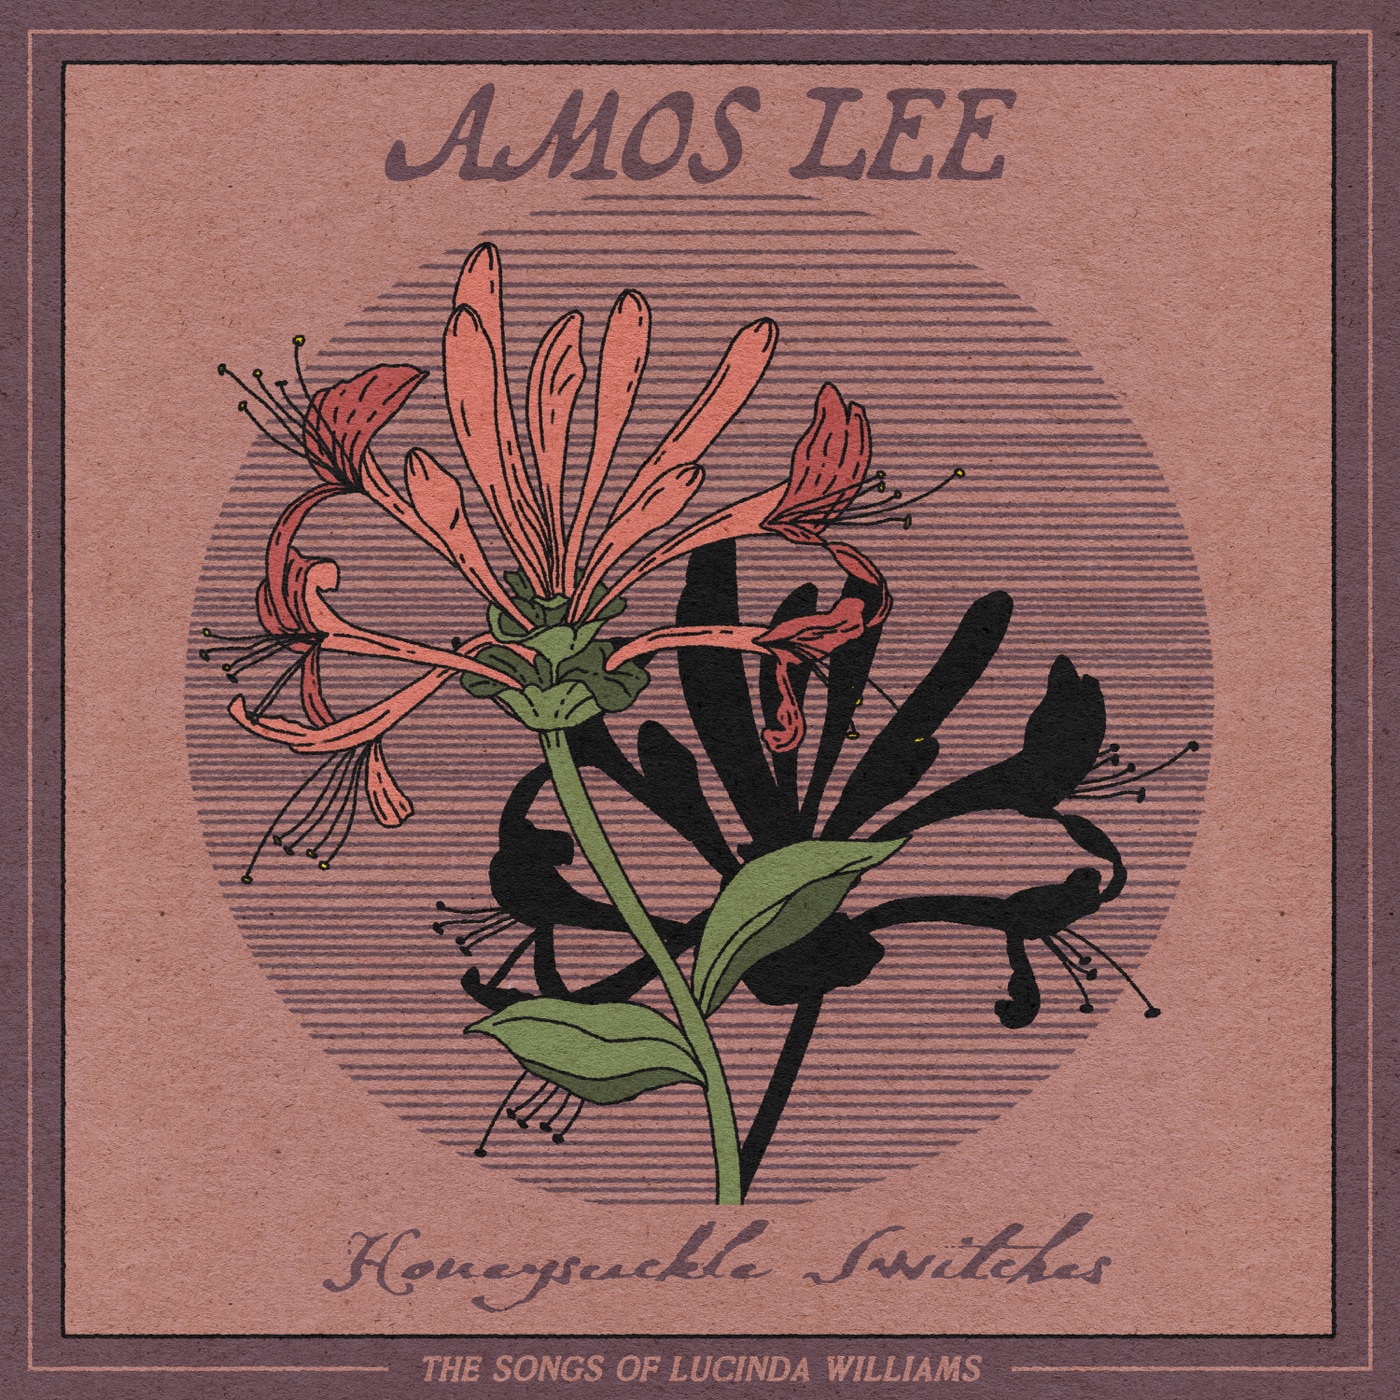 Honeysuckle Switches: The Songs of Lucinda Williams by Amos Lee